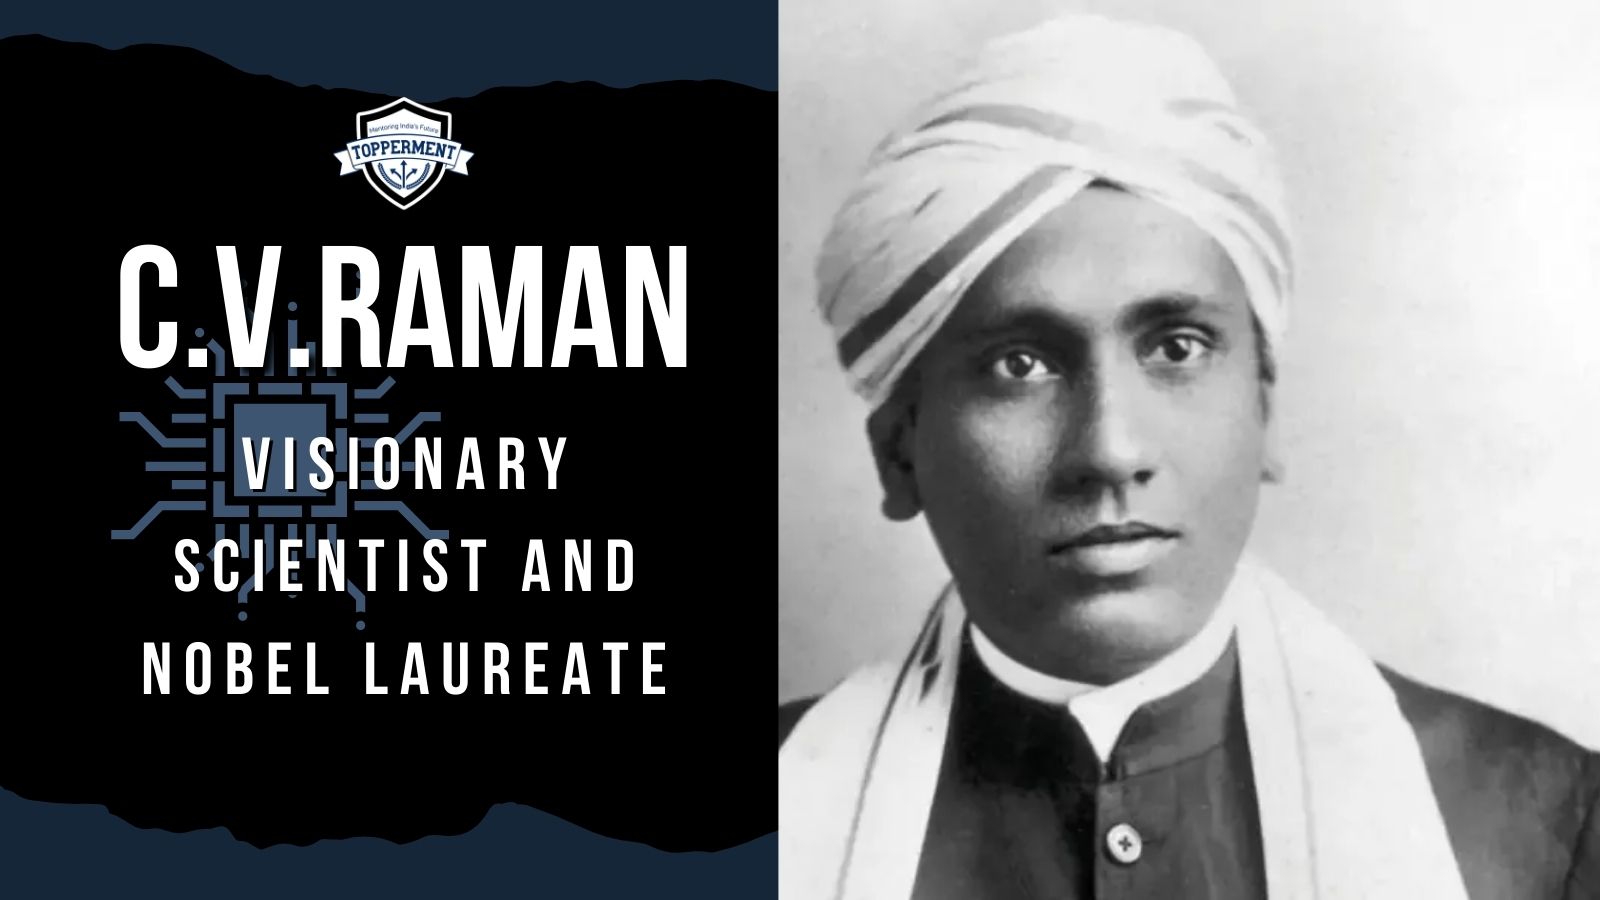 SIR C.V. RAMAN: NOBEL LAUREATE WHO SHAPED INDIAN SCIENCE-Topperment